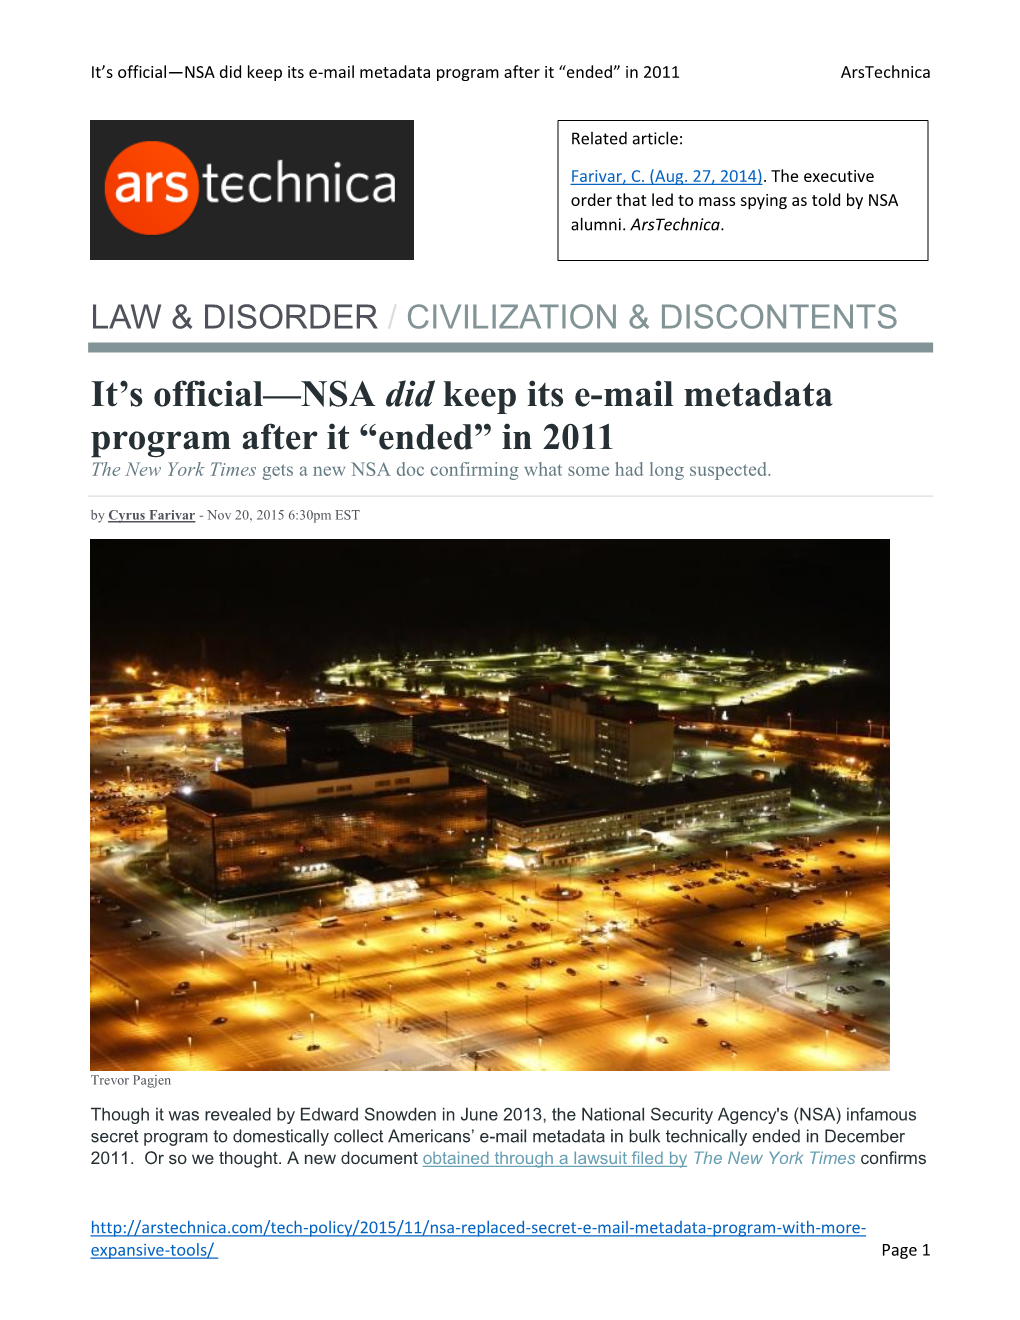 It's Official—NSA Did Keep Its E-Mail Metadata